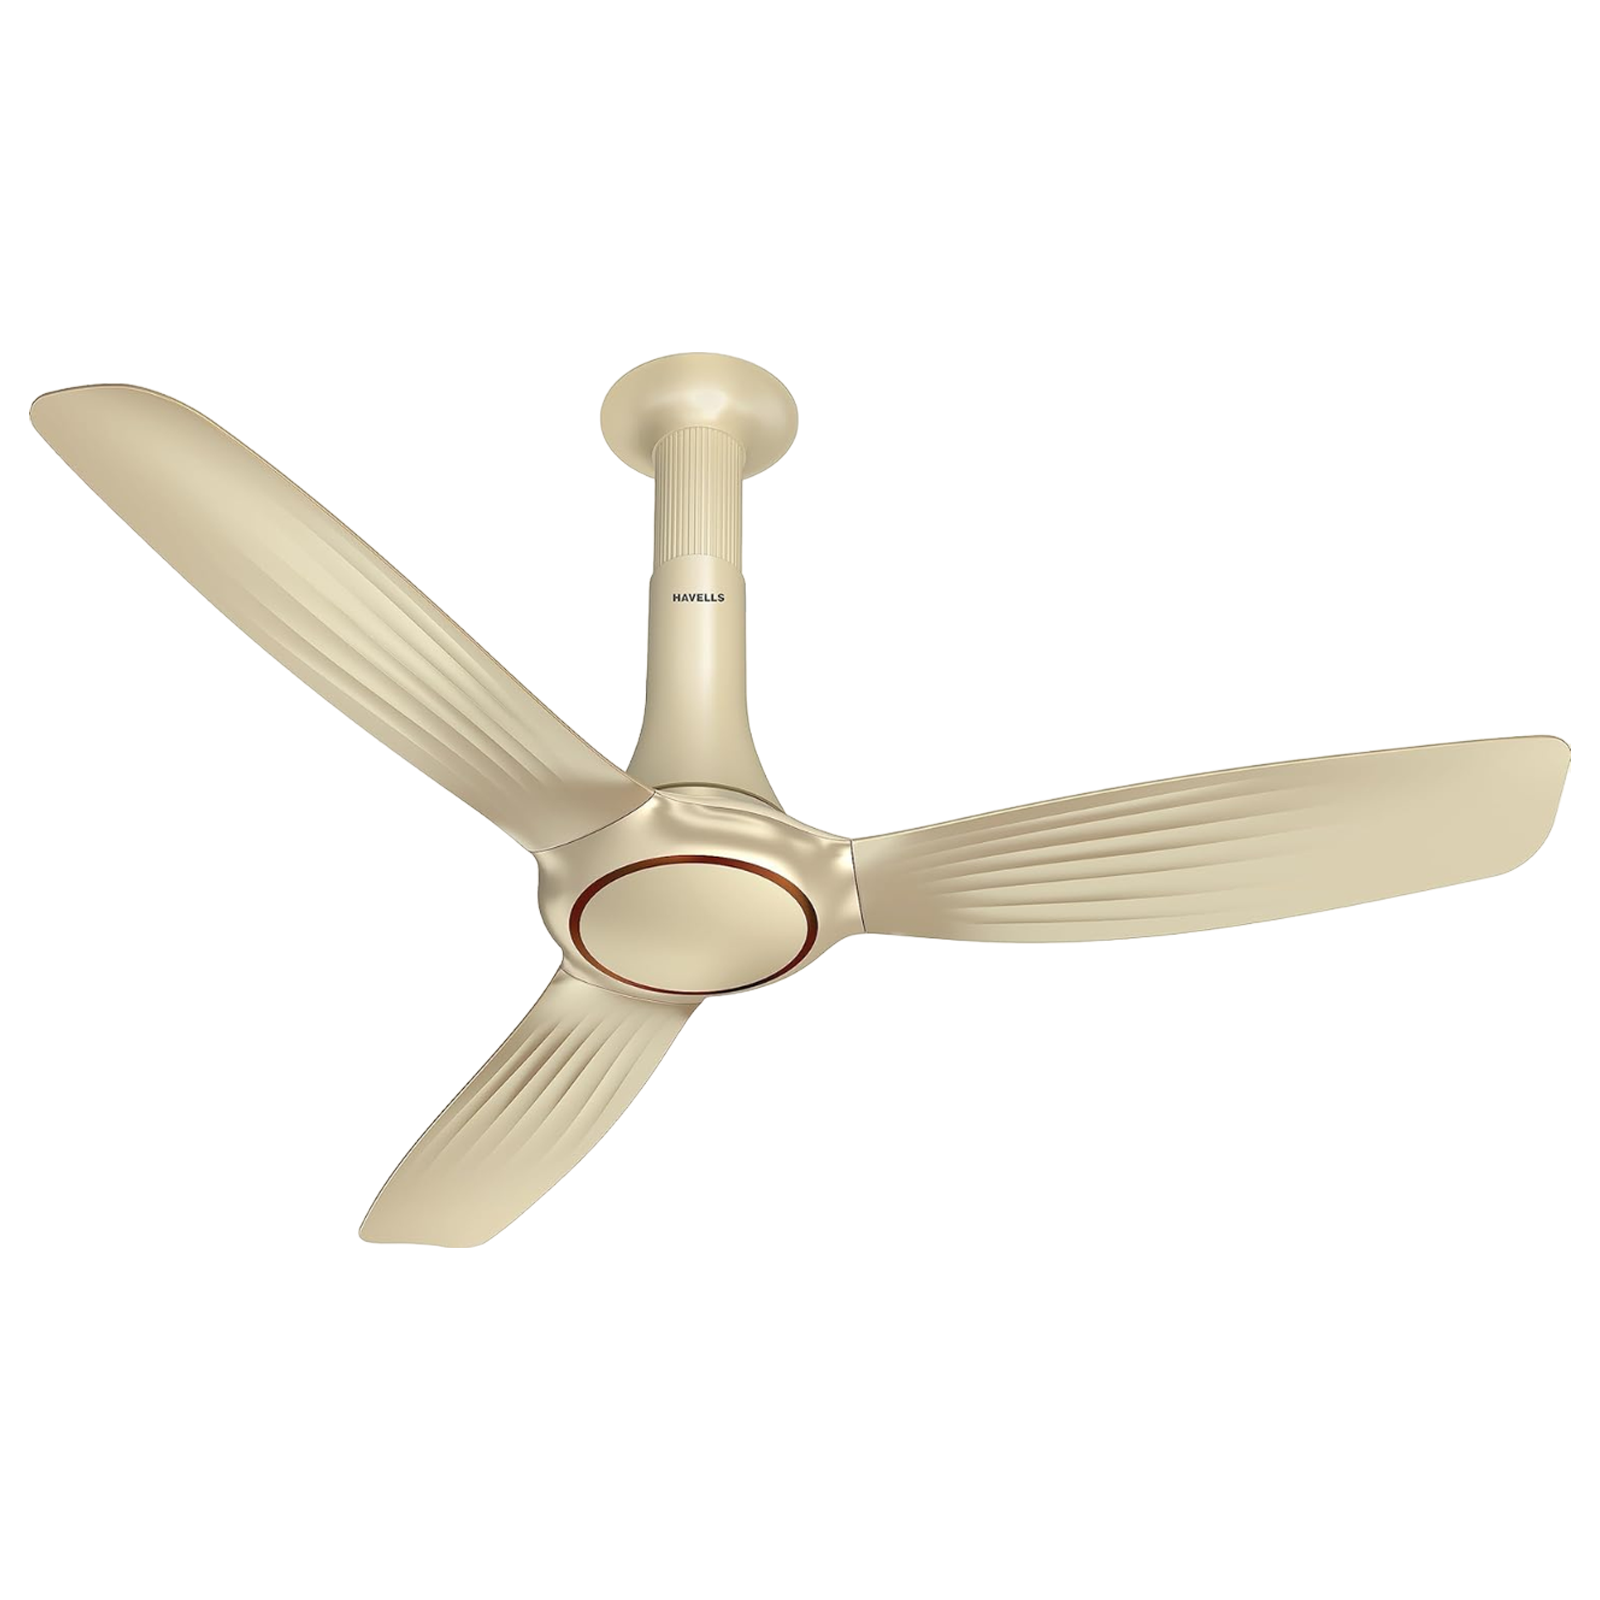 HAVELLS Inox 5 Star 1200mm 3 Blade BLDC Motor Ceiling Fan with Remote (Inverter Technology, Gold Mist Cola)